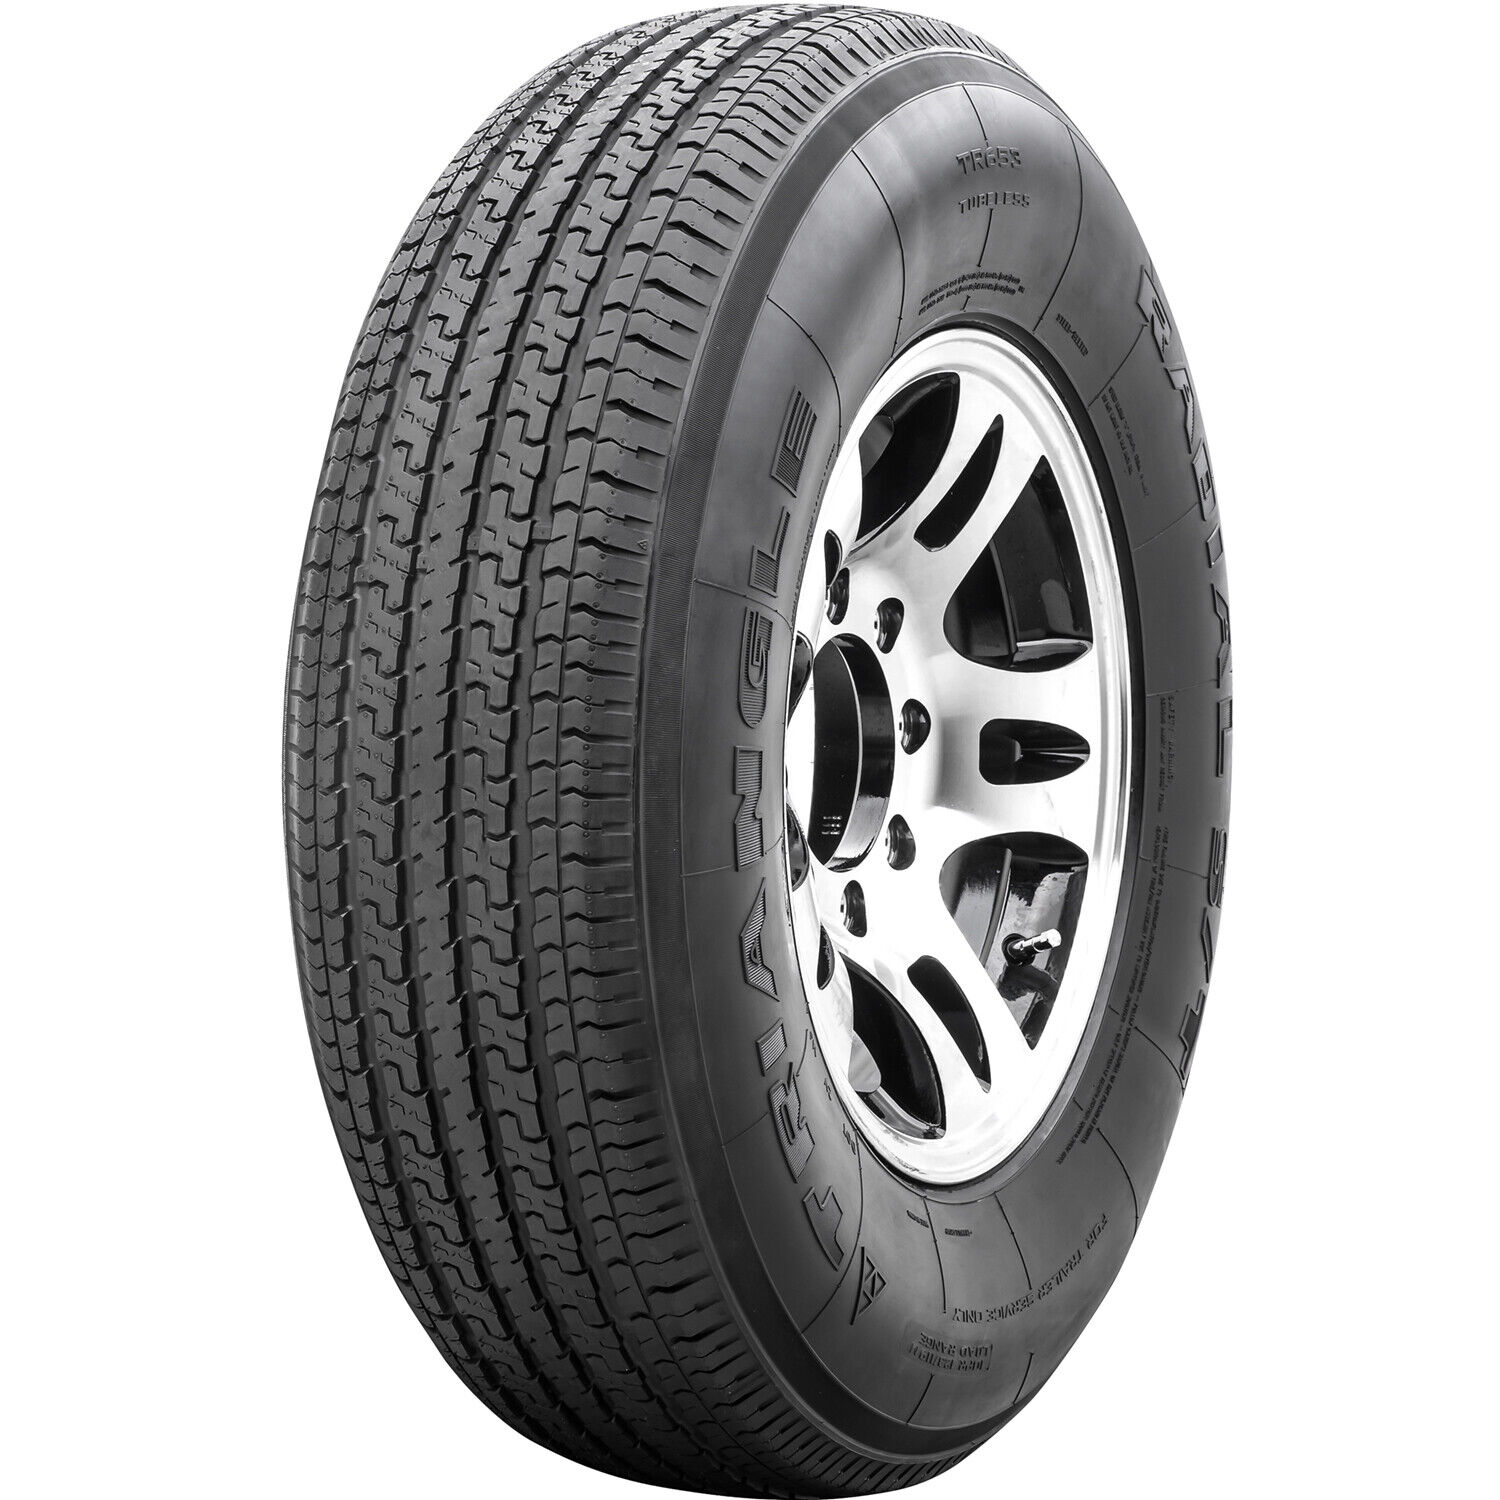 Tire Triangle TR653 ST 175/80R13 Load C 6 Ply Trailer